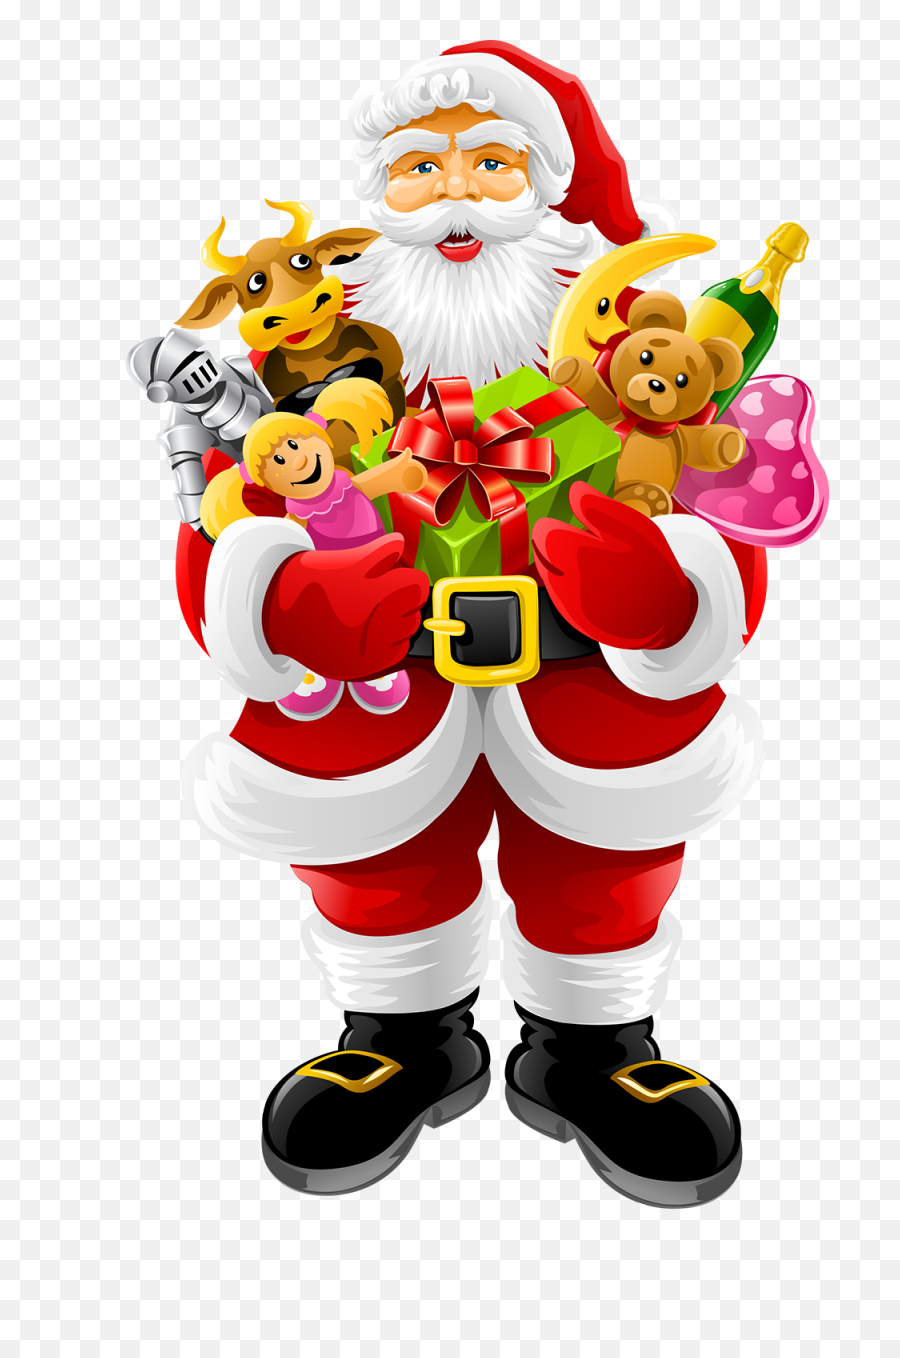 Download Santa Claus Holding Gifts Png Image - Merry Santa Claus Cartoon Holding Gifts,Santa Png Image